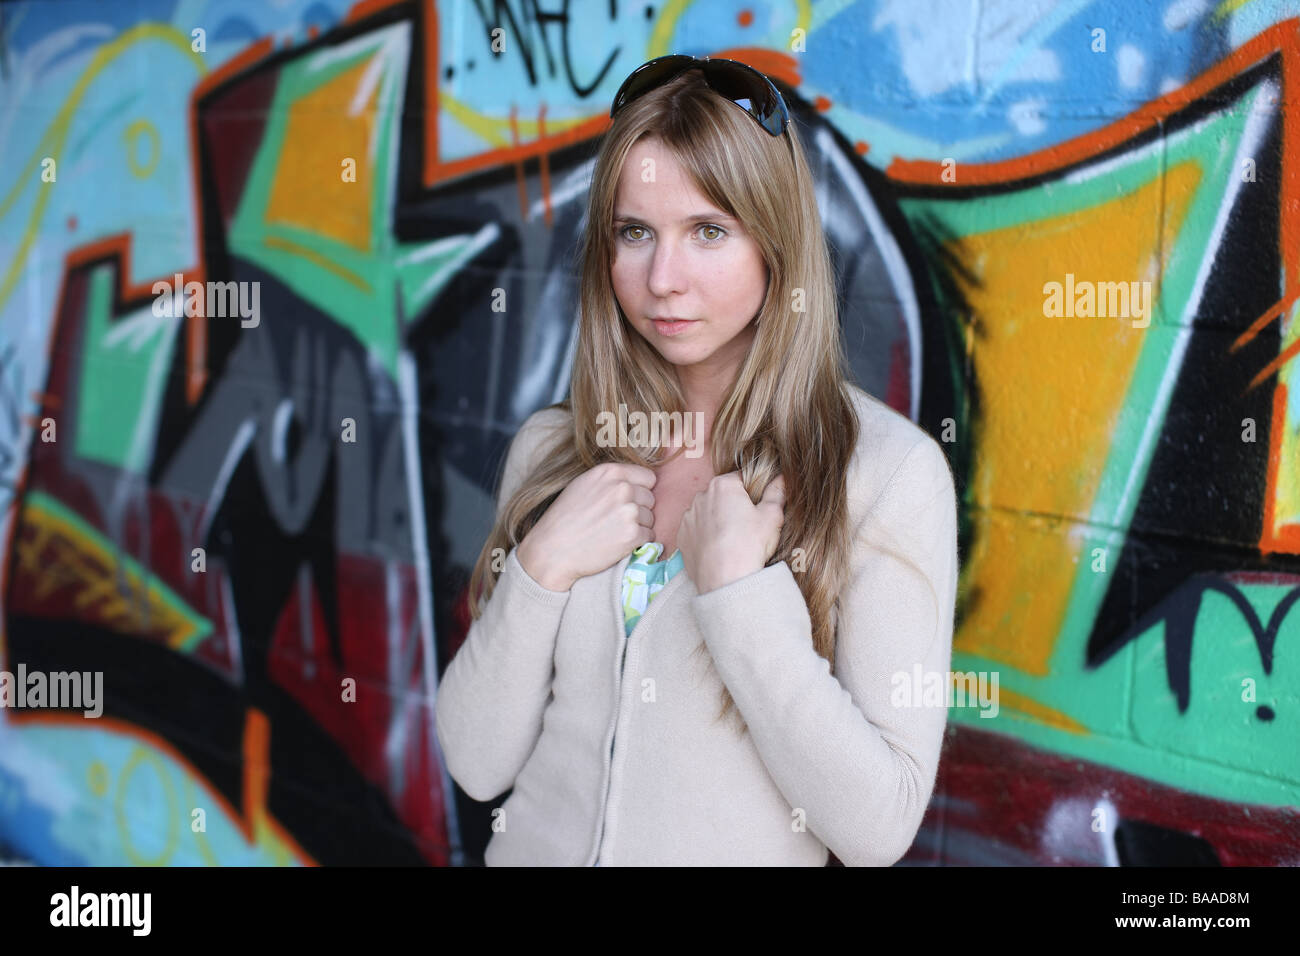 Head and shoulders shot of girl up against a graffiti sprayed wall Stock Photo